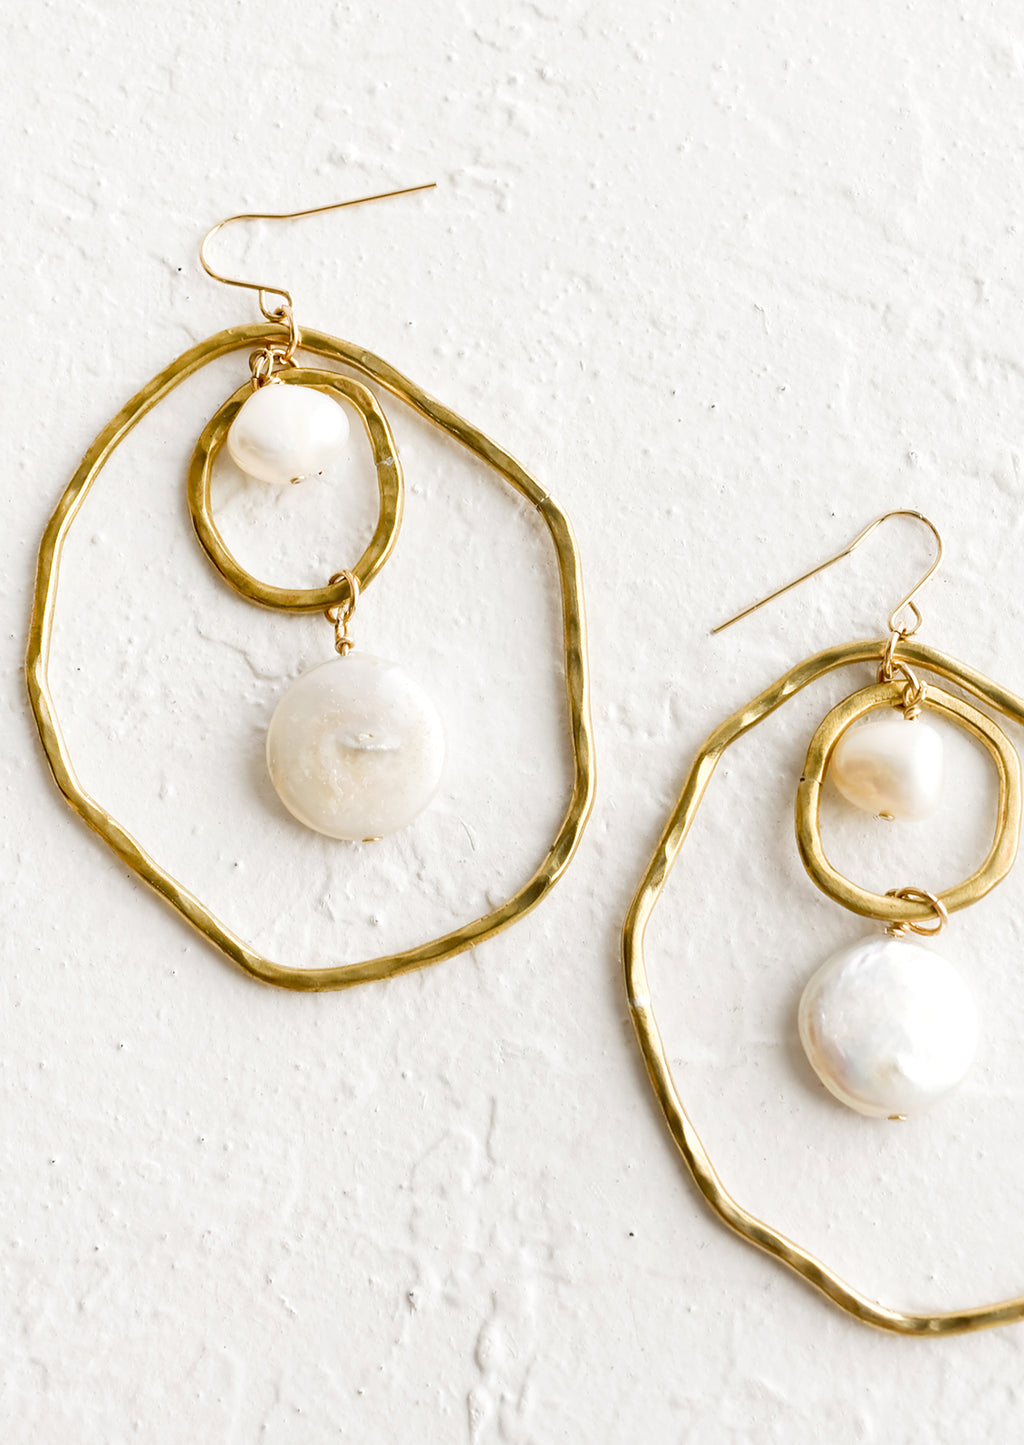 1: A pair of gold earrings with freeform hoops and floating pearls.